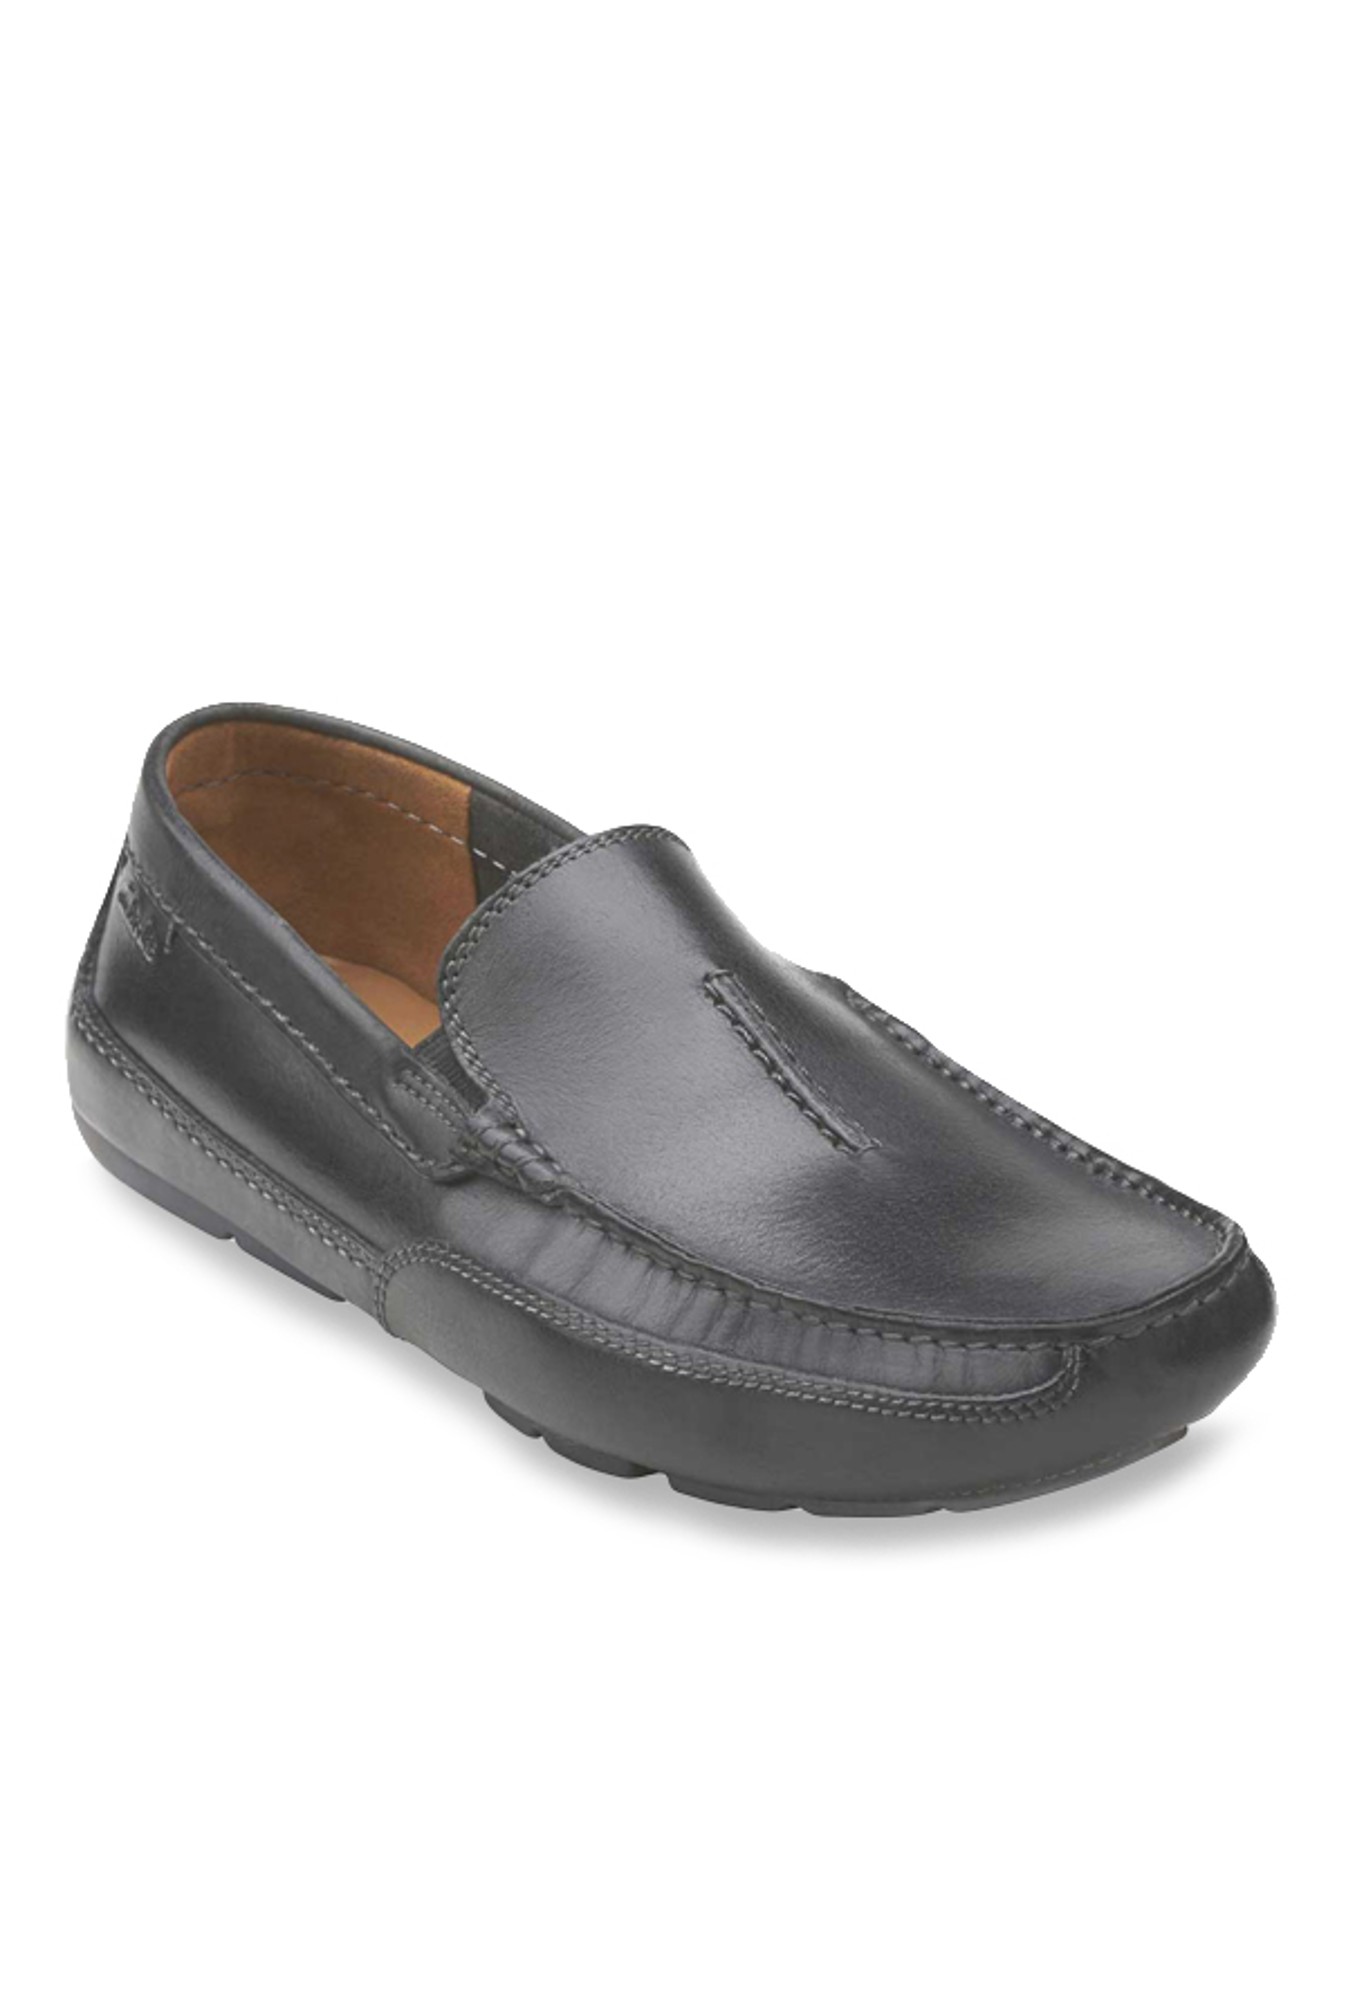 Clarks Ashmont Race Black Loafers from 